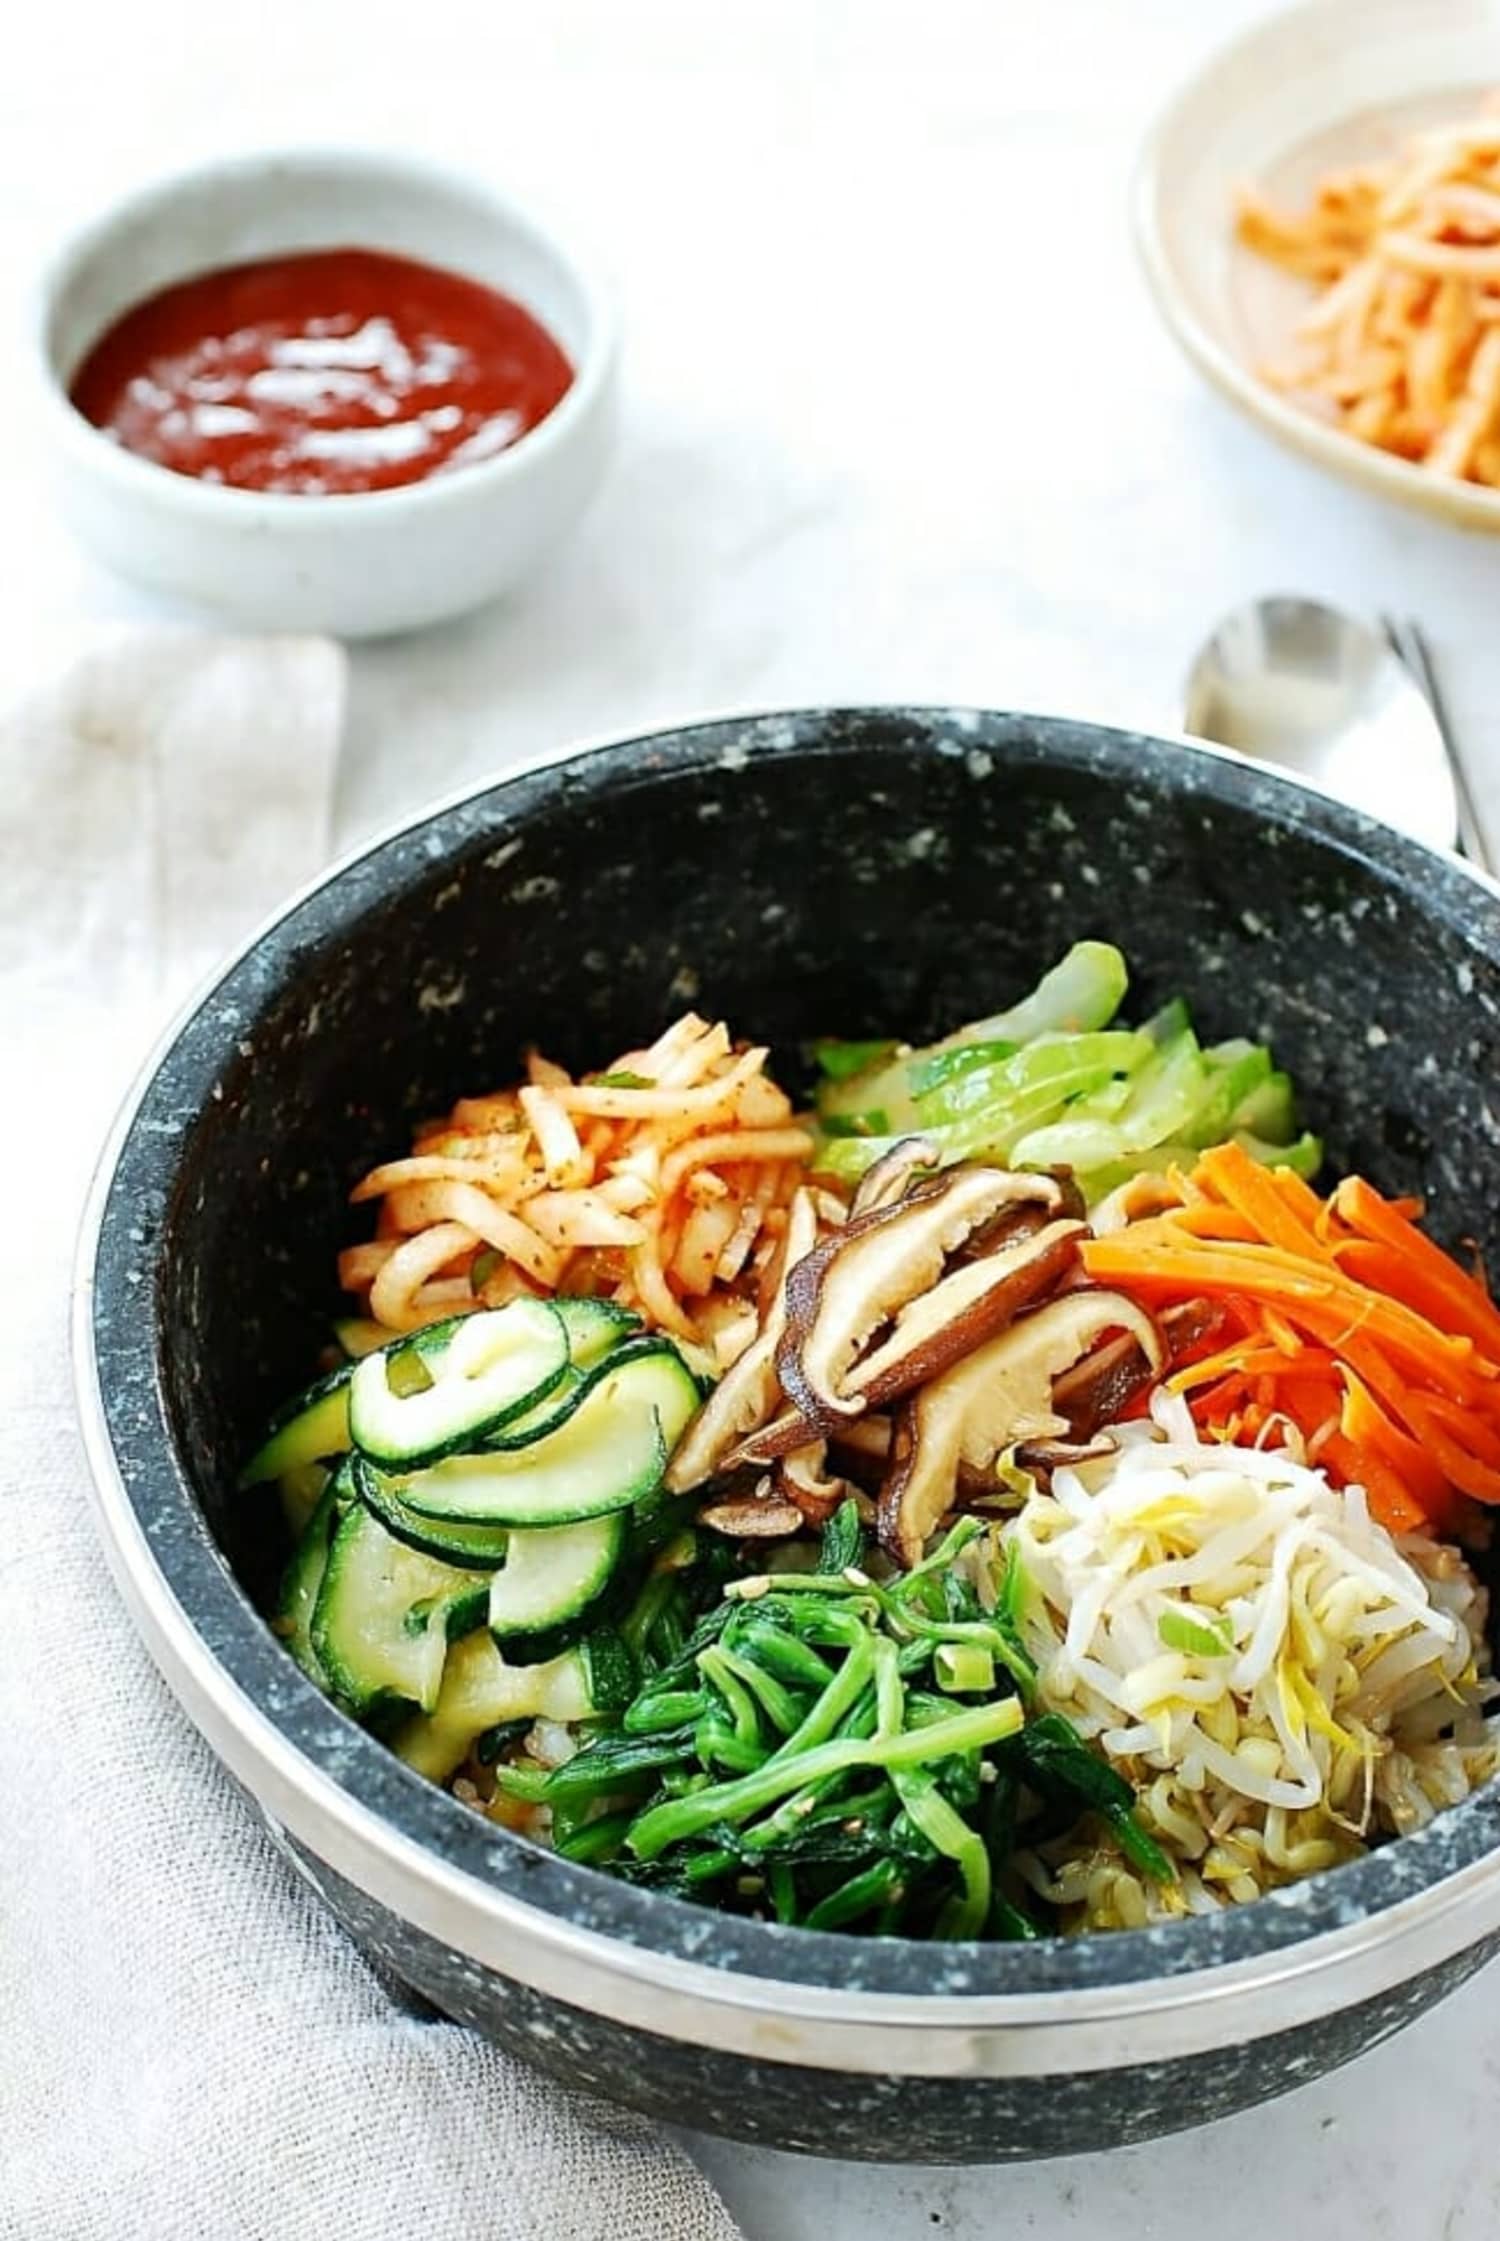 11 Essential Korean Recipes If You’re Just Starting Out | Kitchn